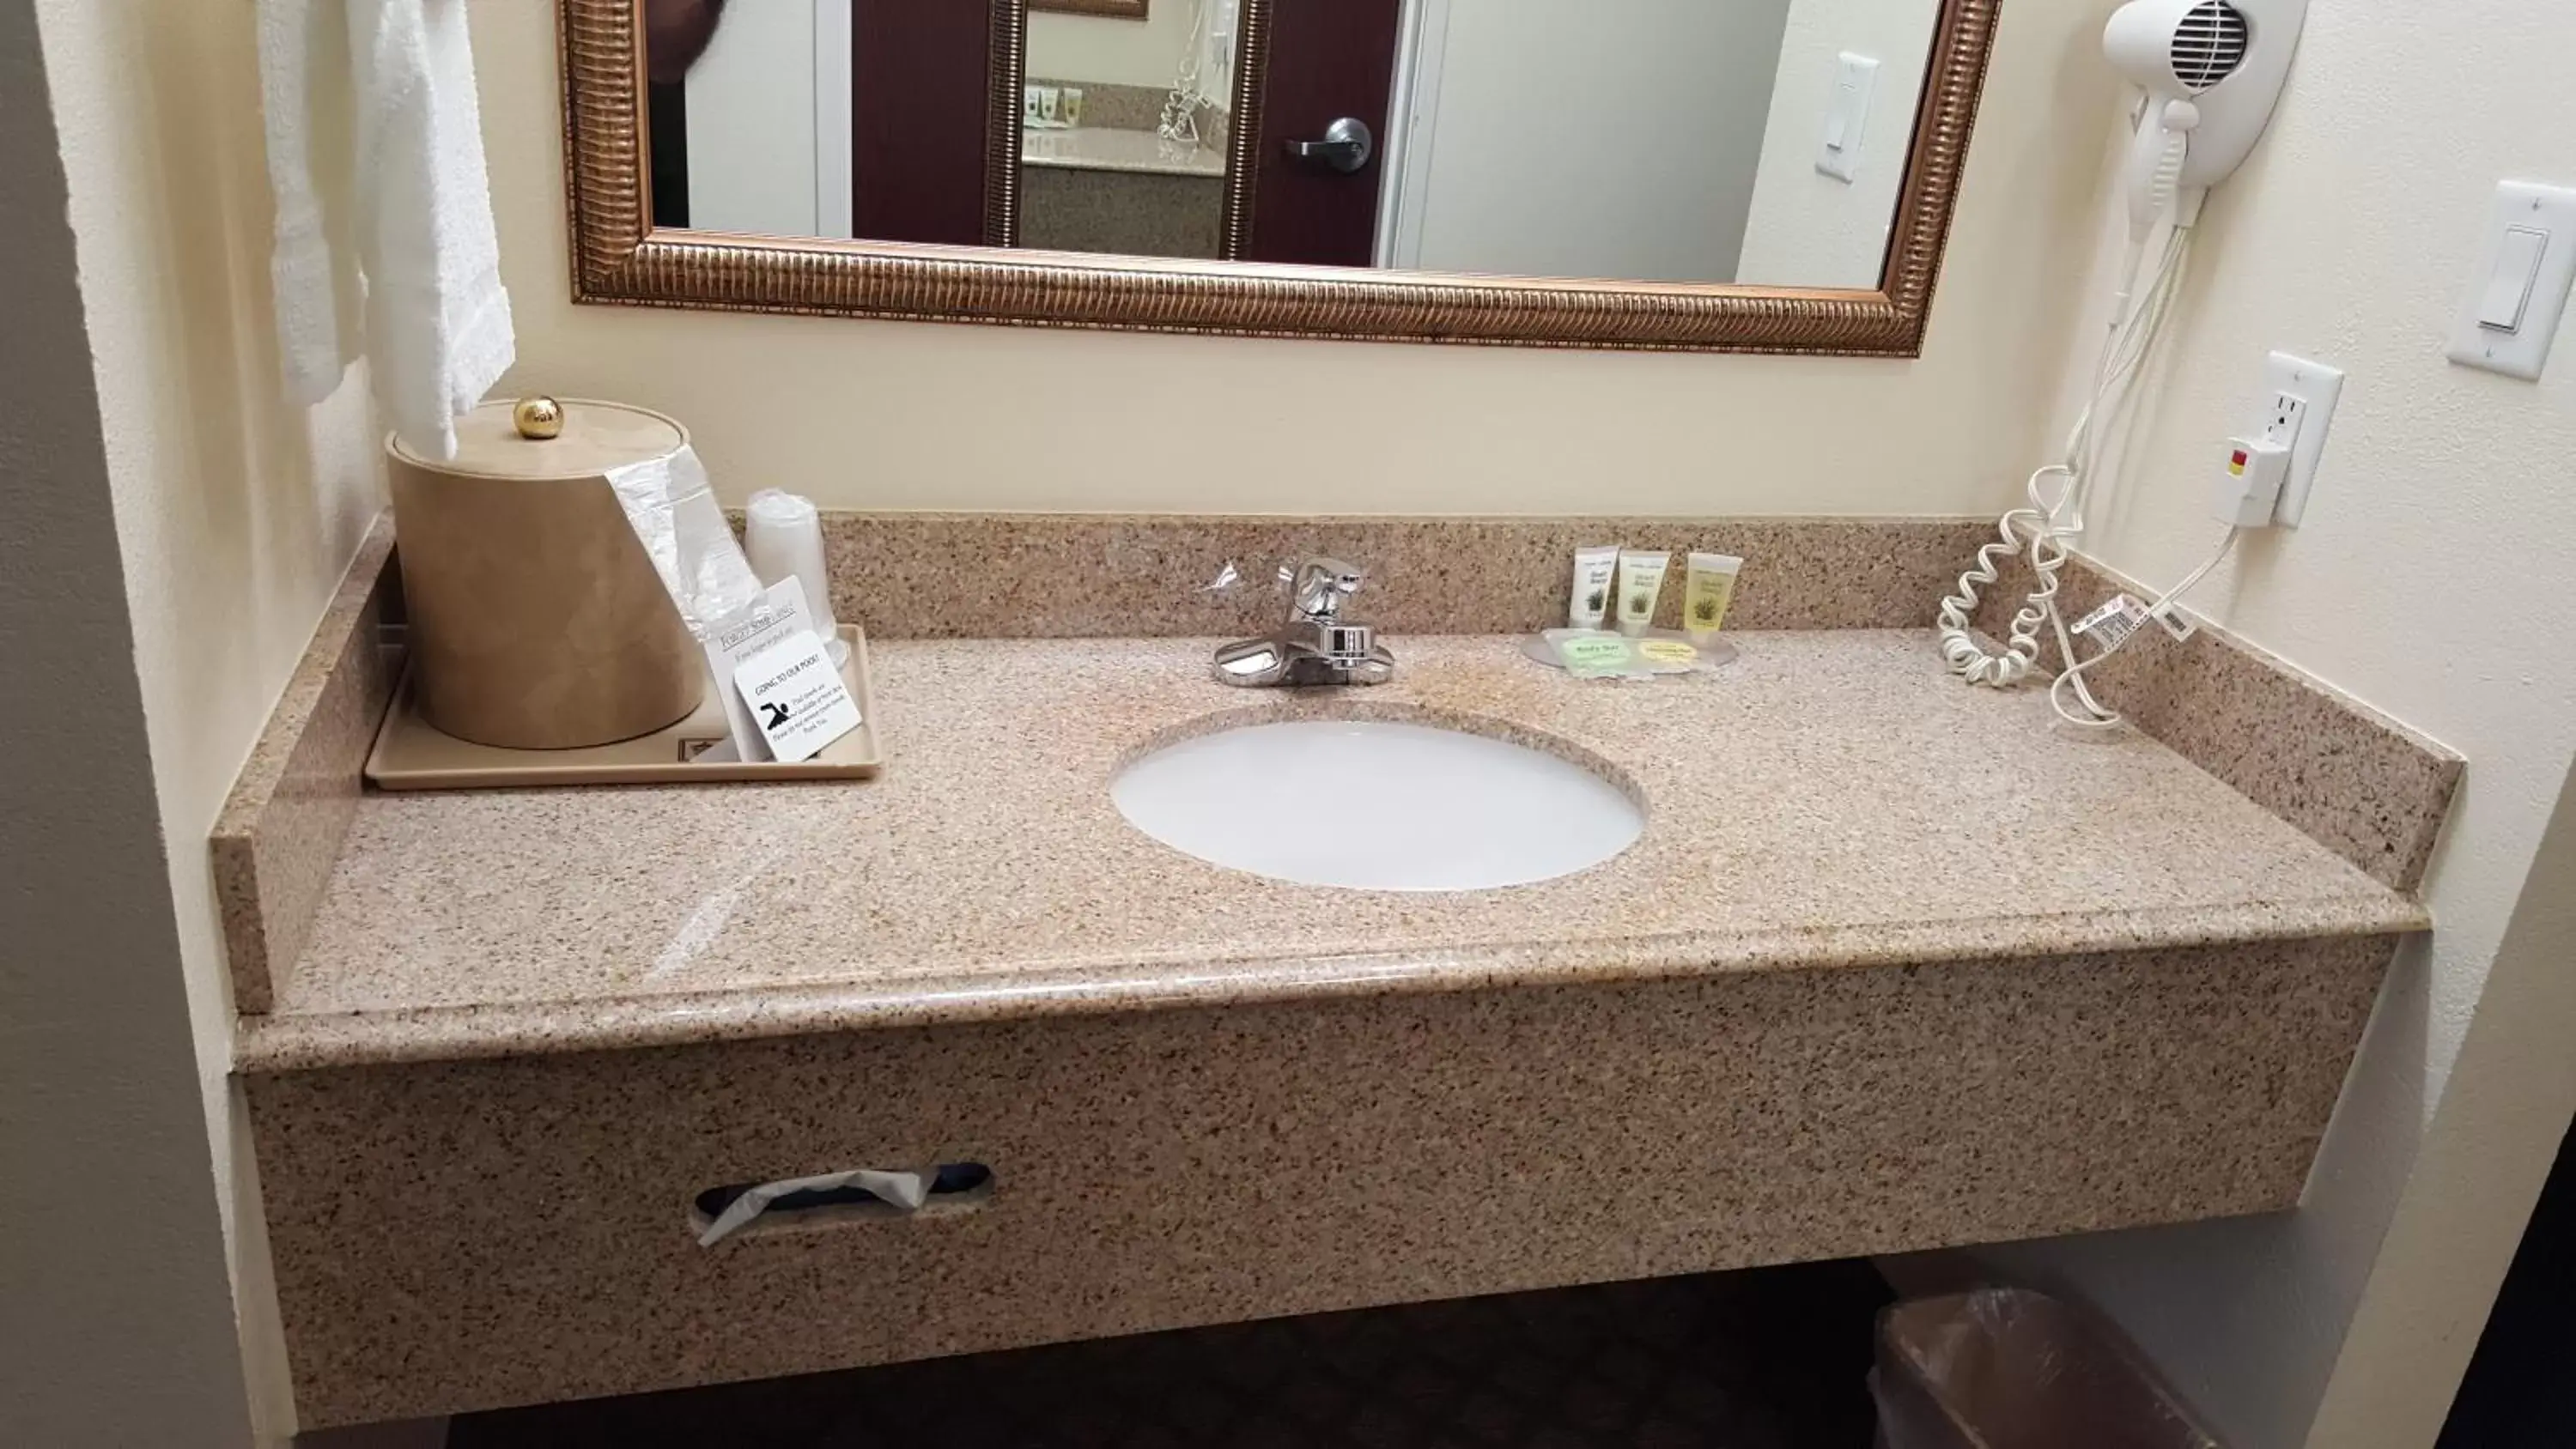 Bathroom in Budget Host Inn and Suites Cameron